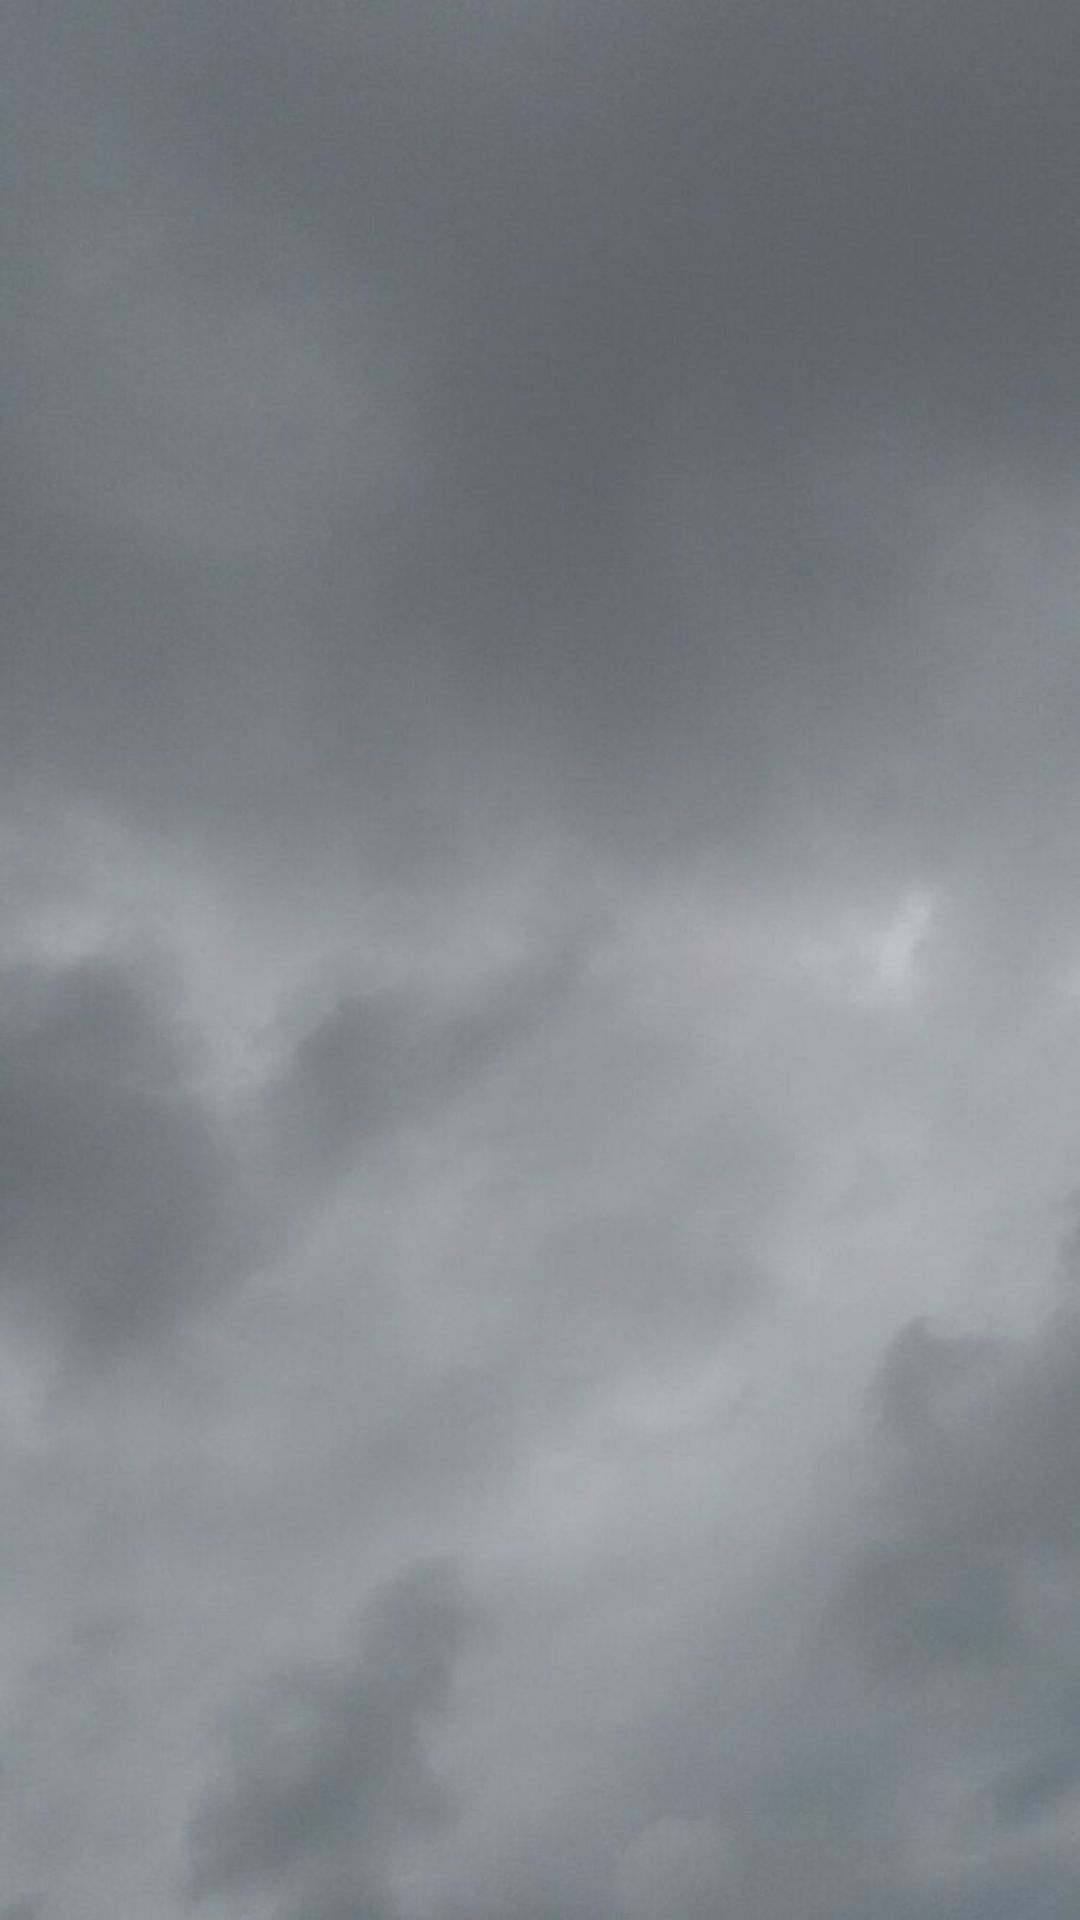 A picture of a cloudy sky - Gray